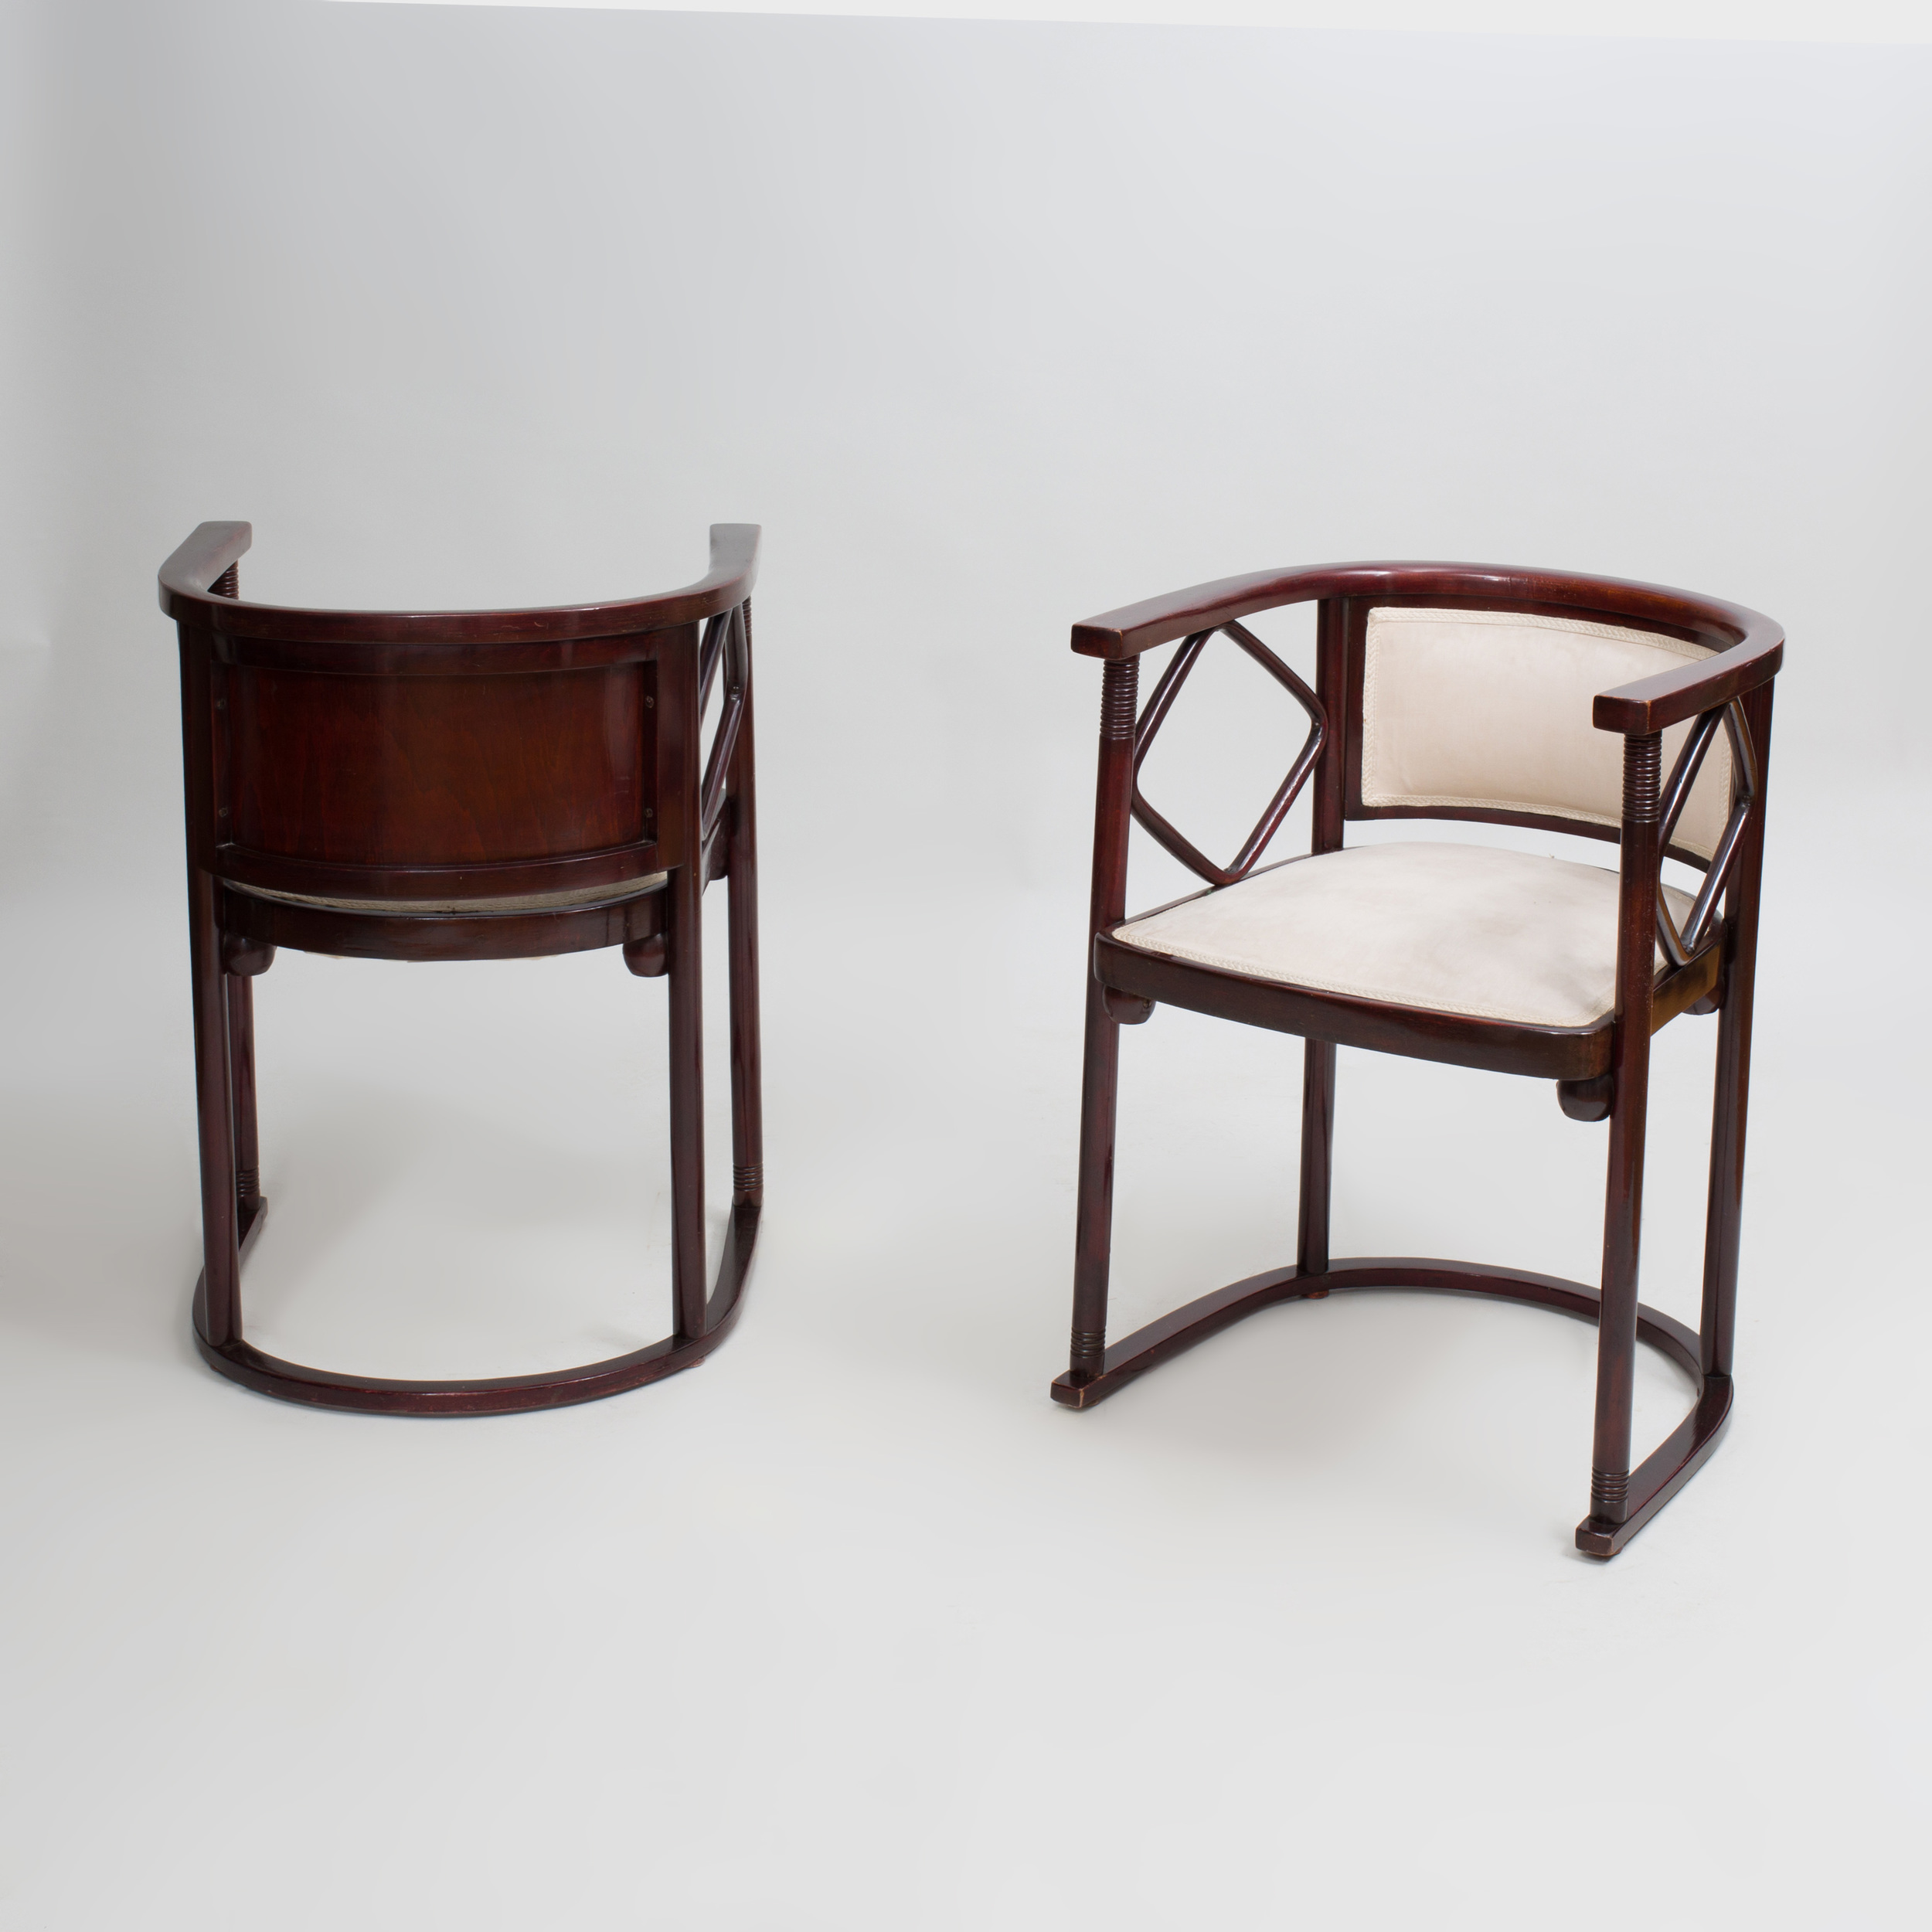 Suite of Josef Hoffmann Stained Wood Seat Furniture